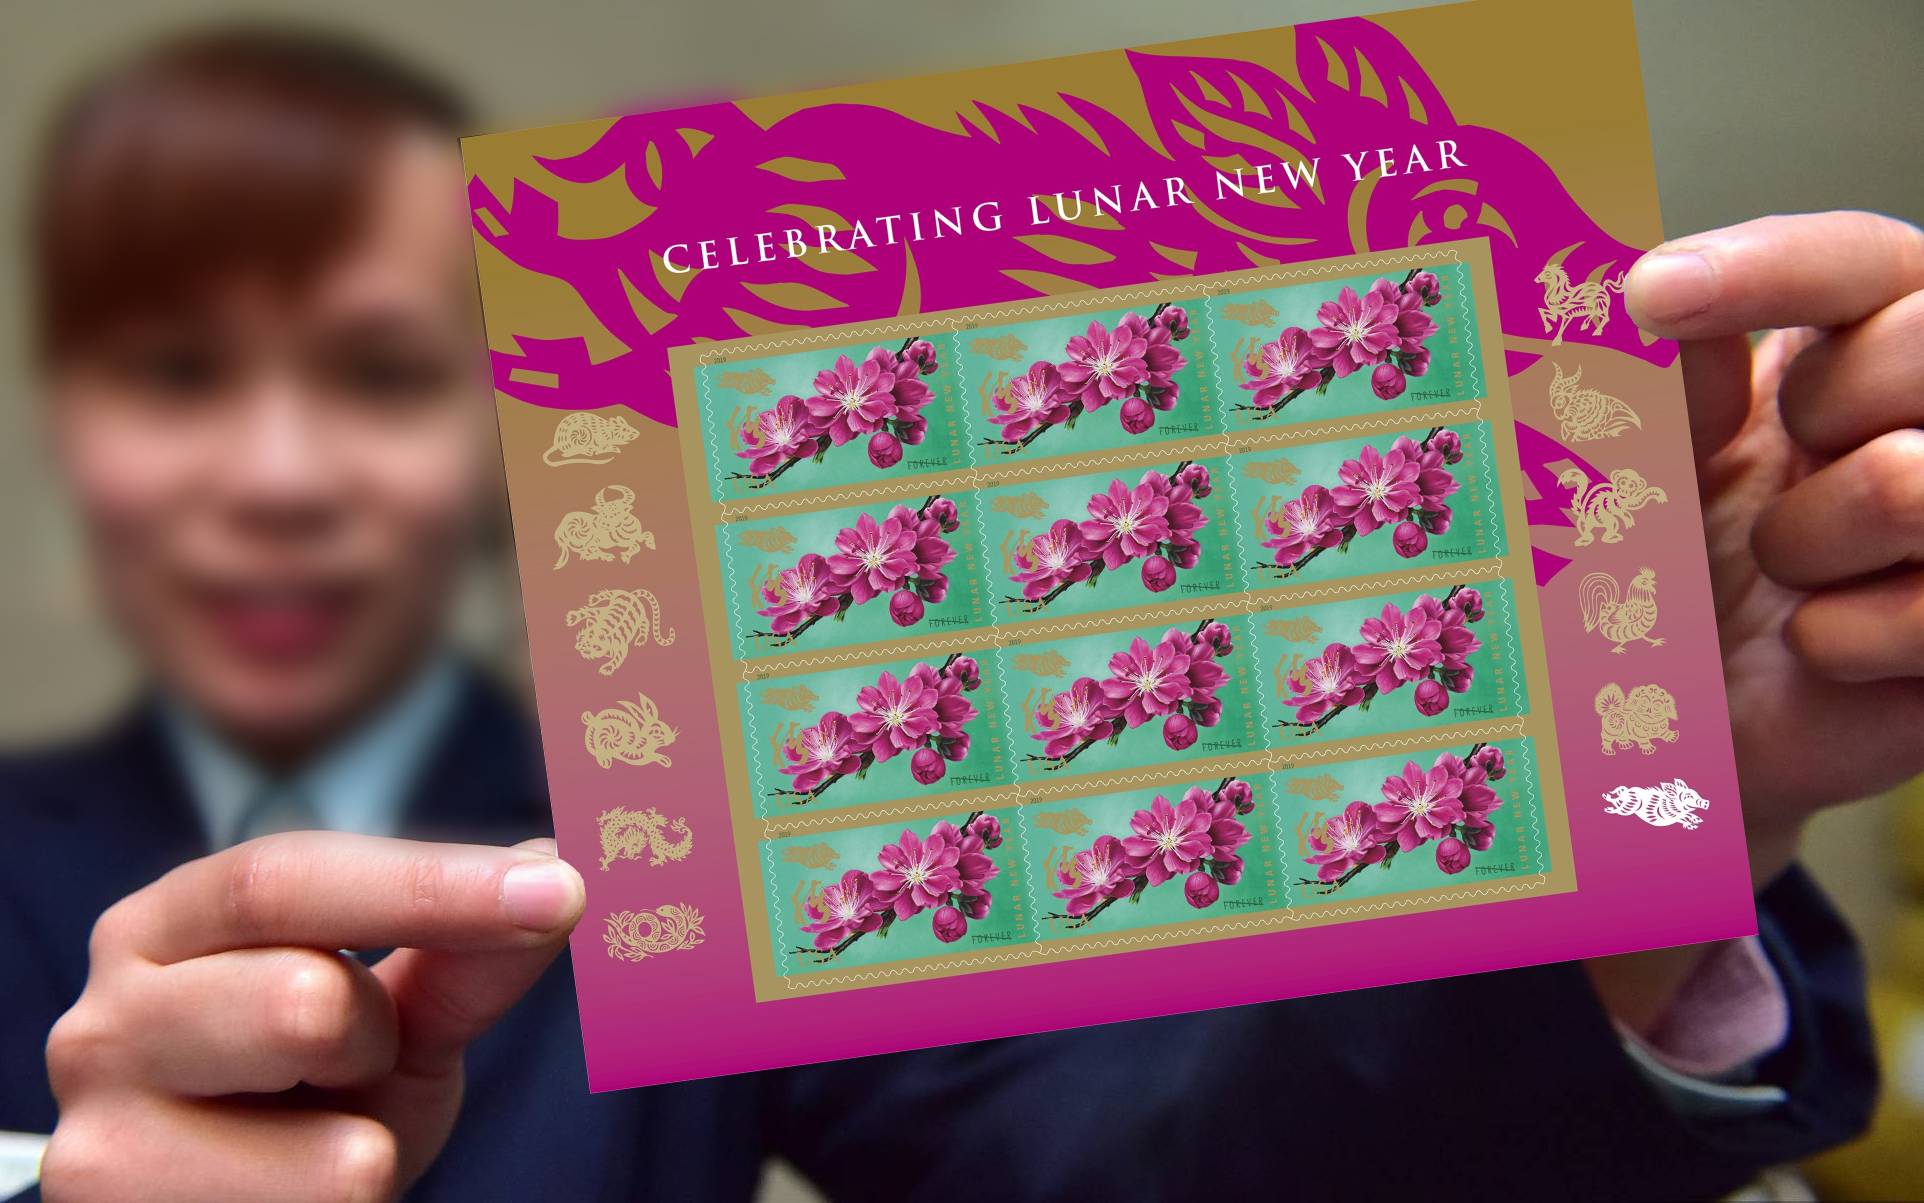 Celebrating Lunar New Year series with Year of the Pig stamp Asia Trend